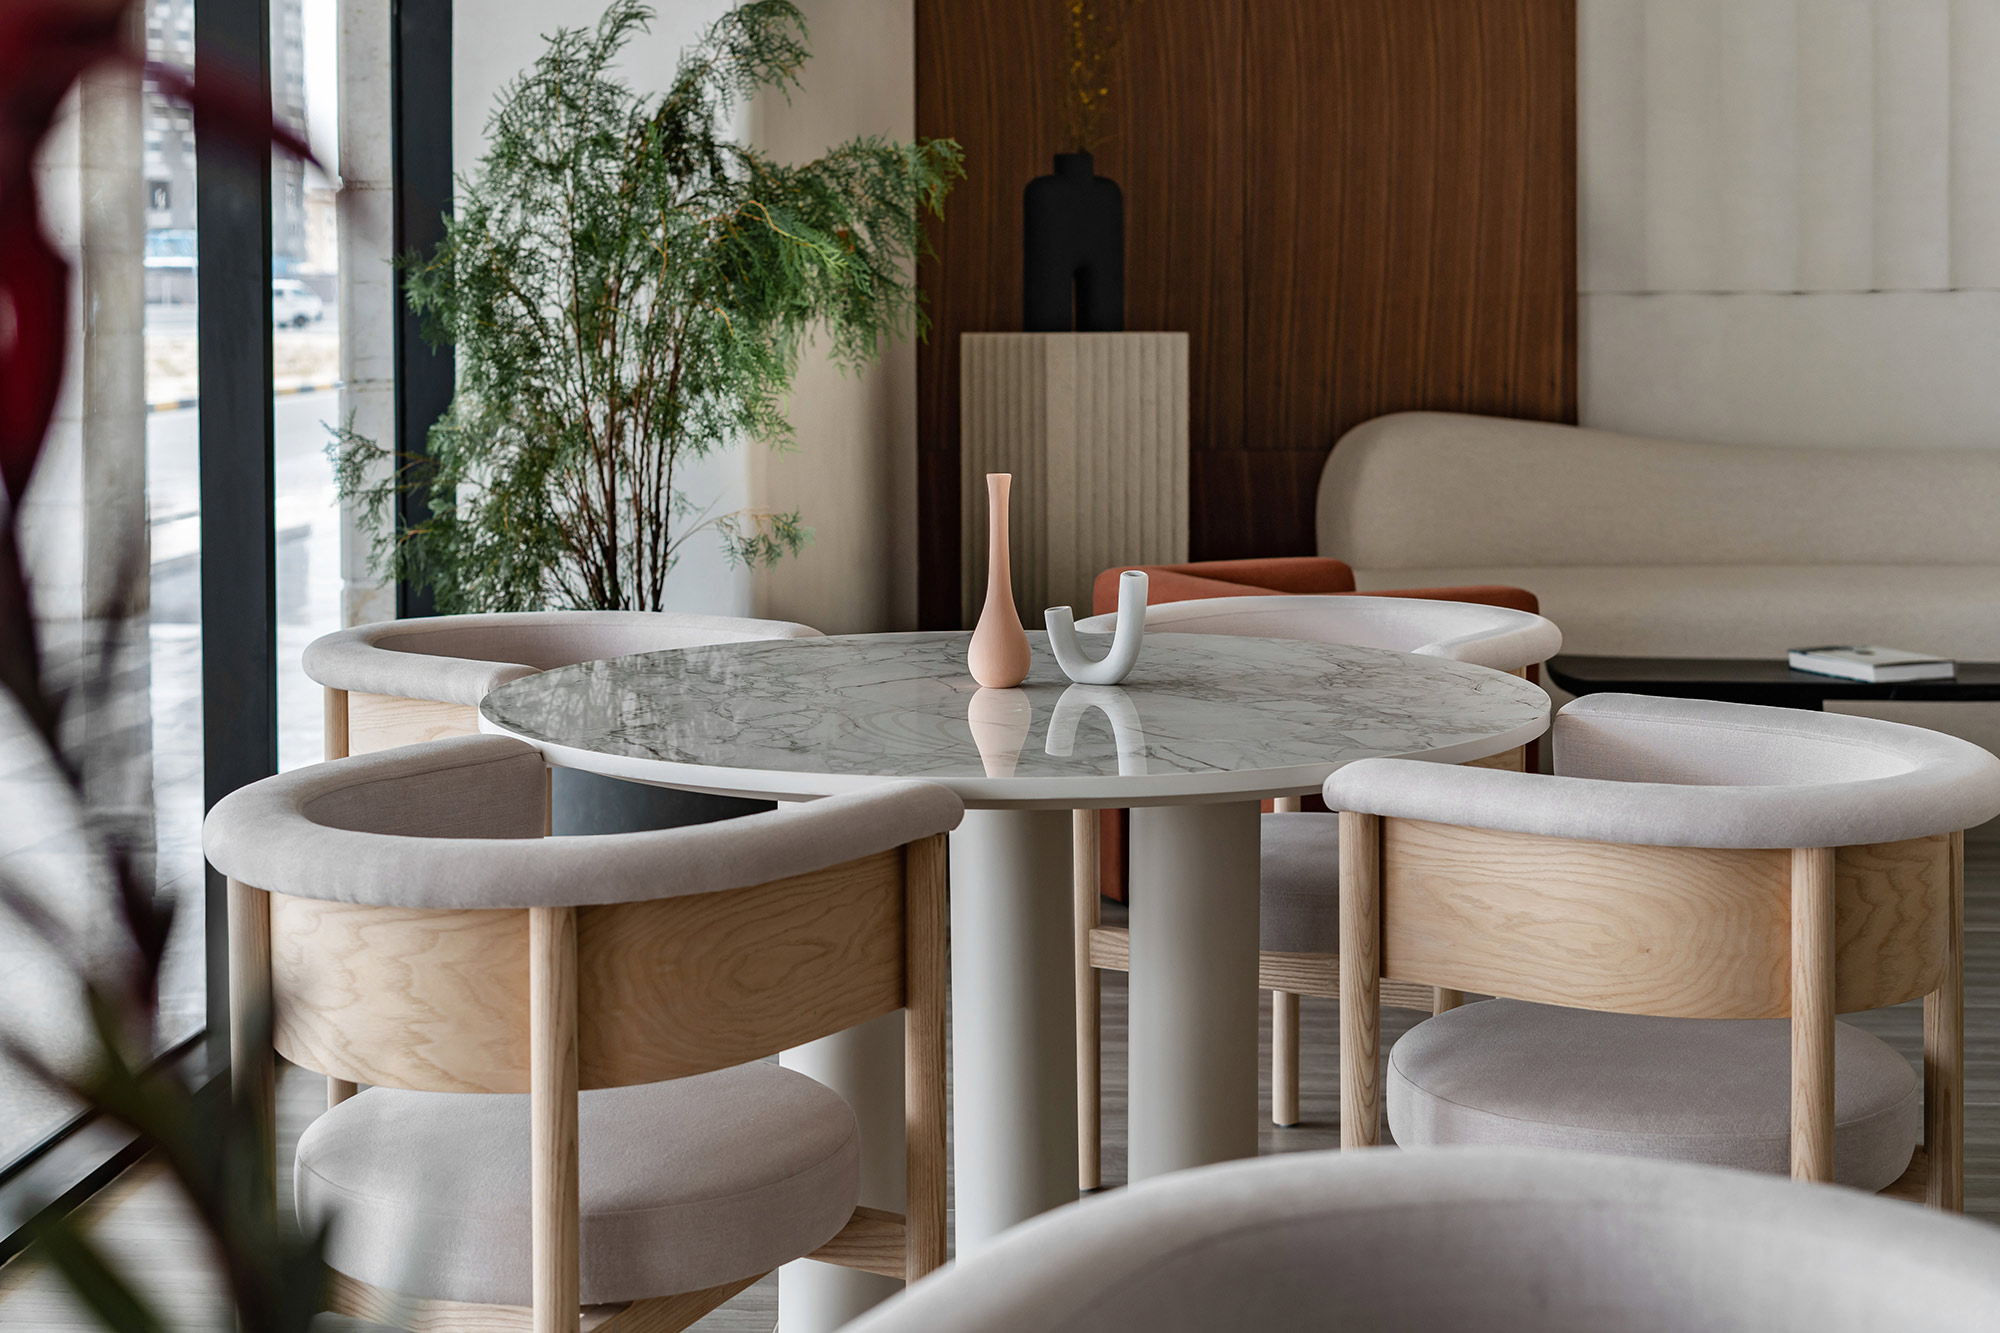 Image of The House by Cest ici Design 1 in {{Tables with Dekton Bergen for coffee lovers in a cozy Emirati space}} - Cosentino